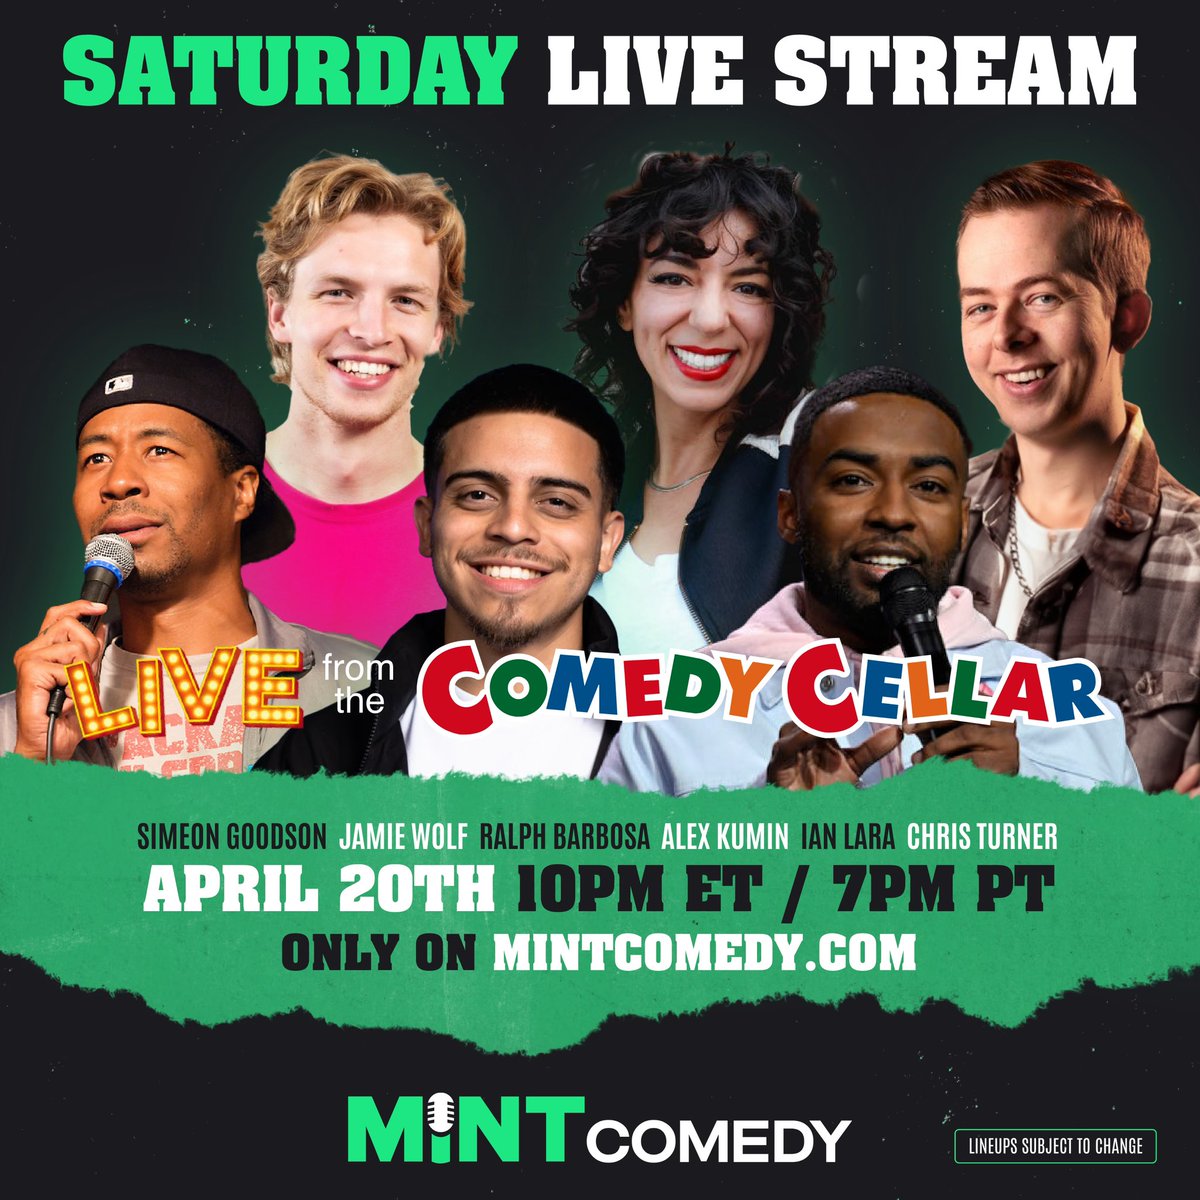 Celebrate 4/20 the right way by kicking back on your couch and watching some LIVE standup comedy 🍃 Watch six top comedians perform LIVE from the iconic @ComedyCellarUSA on 4/20 at 10pm et / 7pm et, only on mintcomedy.com! Featuring: #simeongoodson @jamiewolfcomedy…